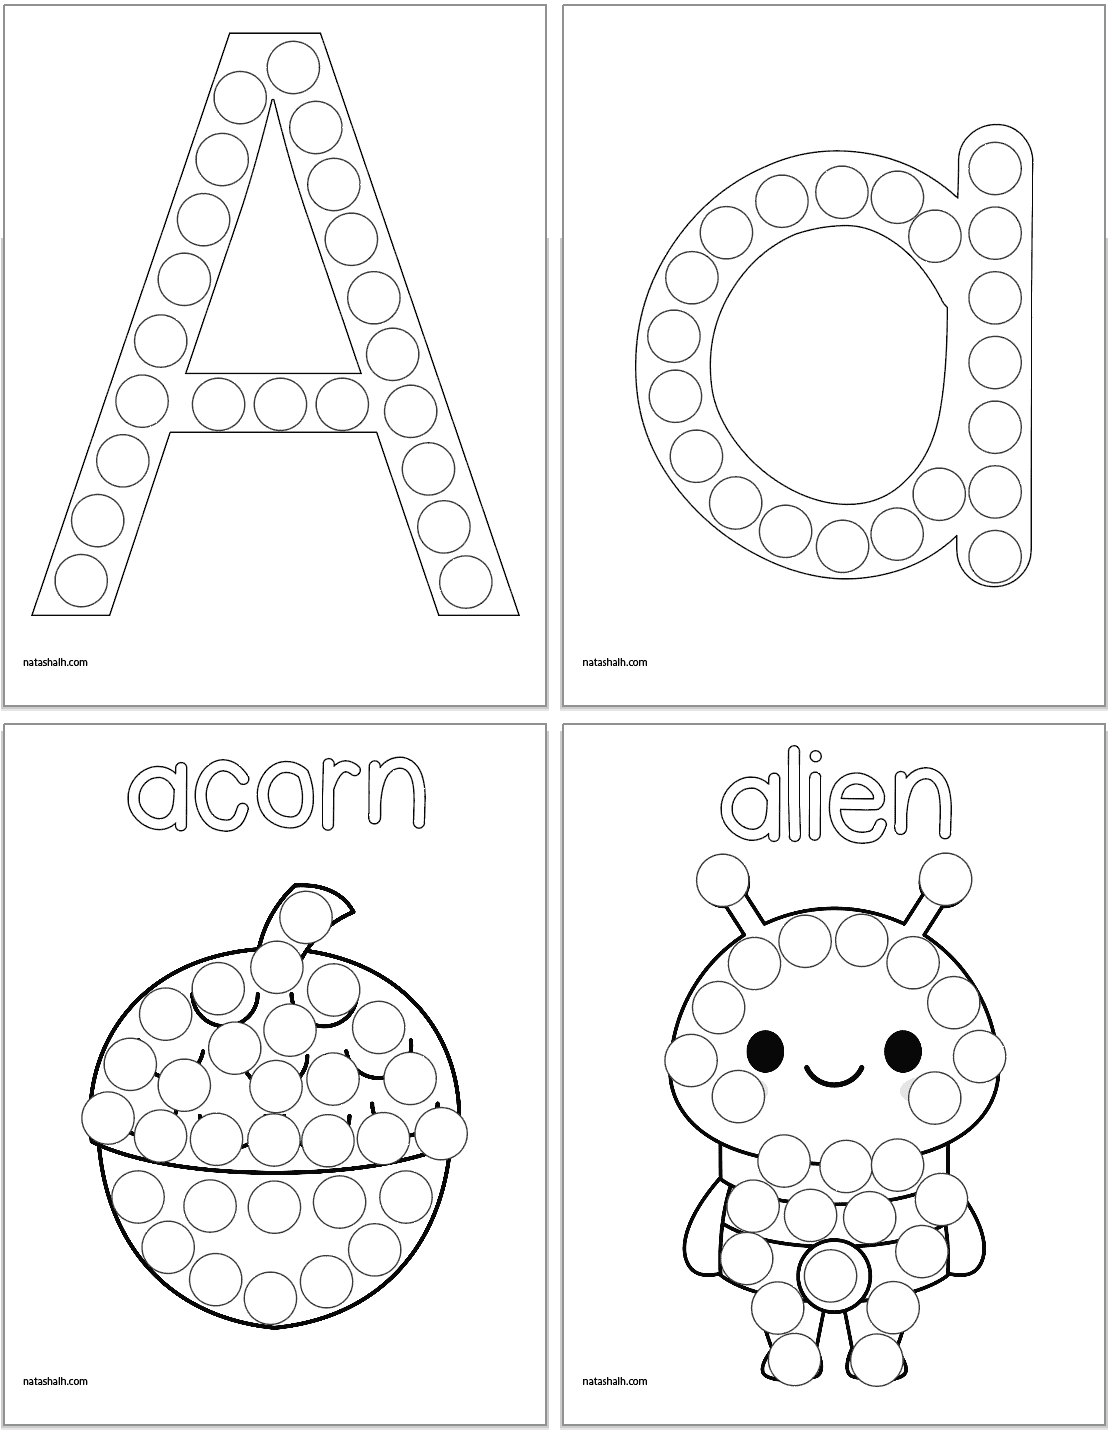 Four letter A dot marker pages. Images include: A, a, acorn, and alien